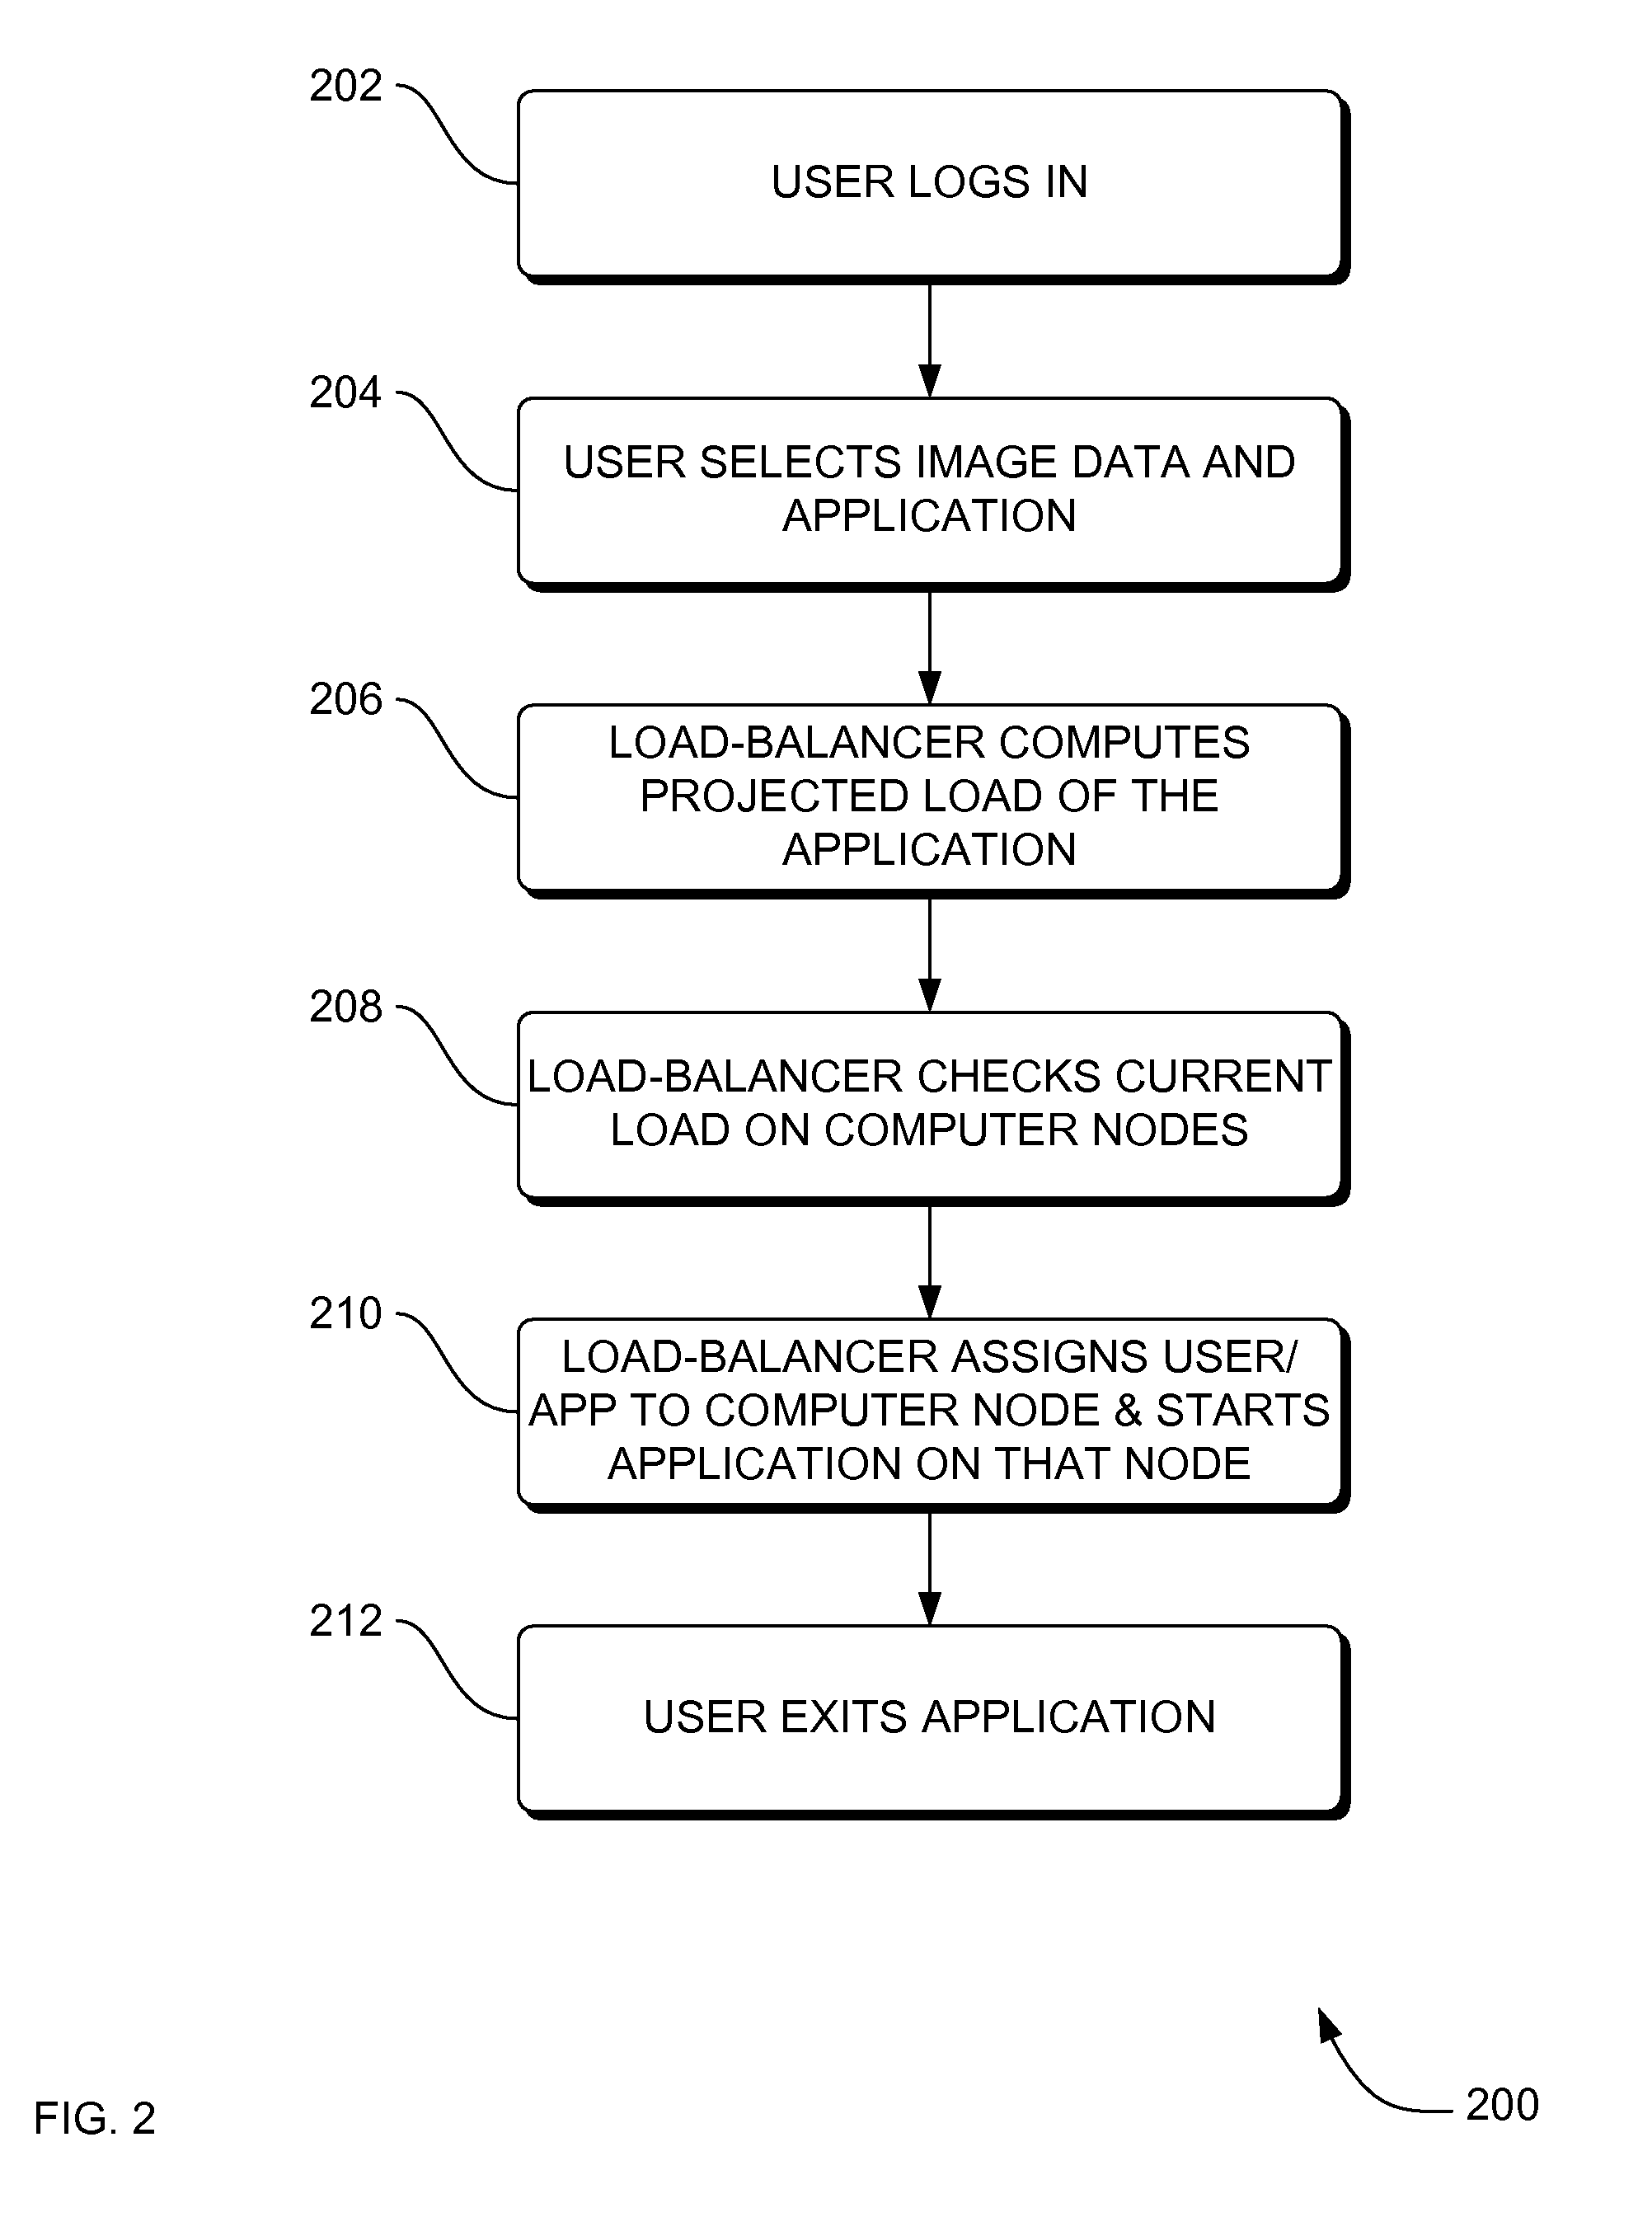 Systems, methods and apparatus for load balancing across computer nodes of heathcare imaging devices